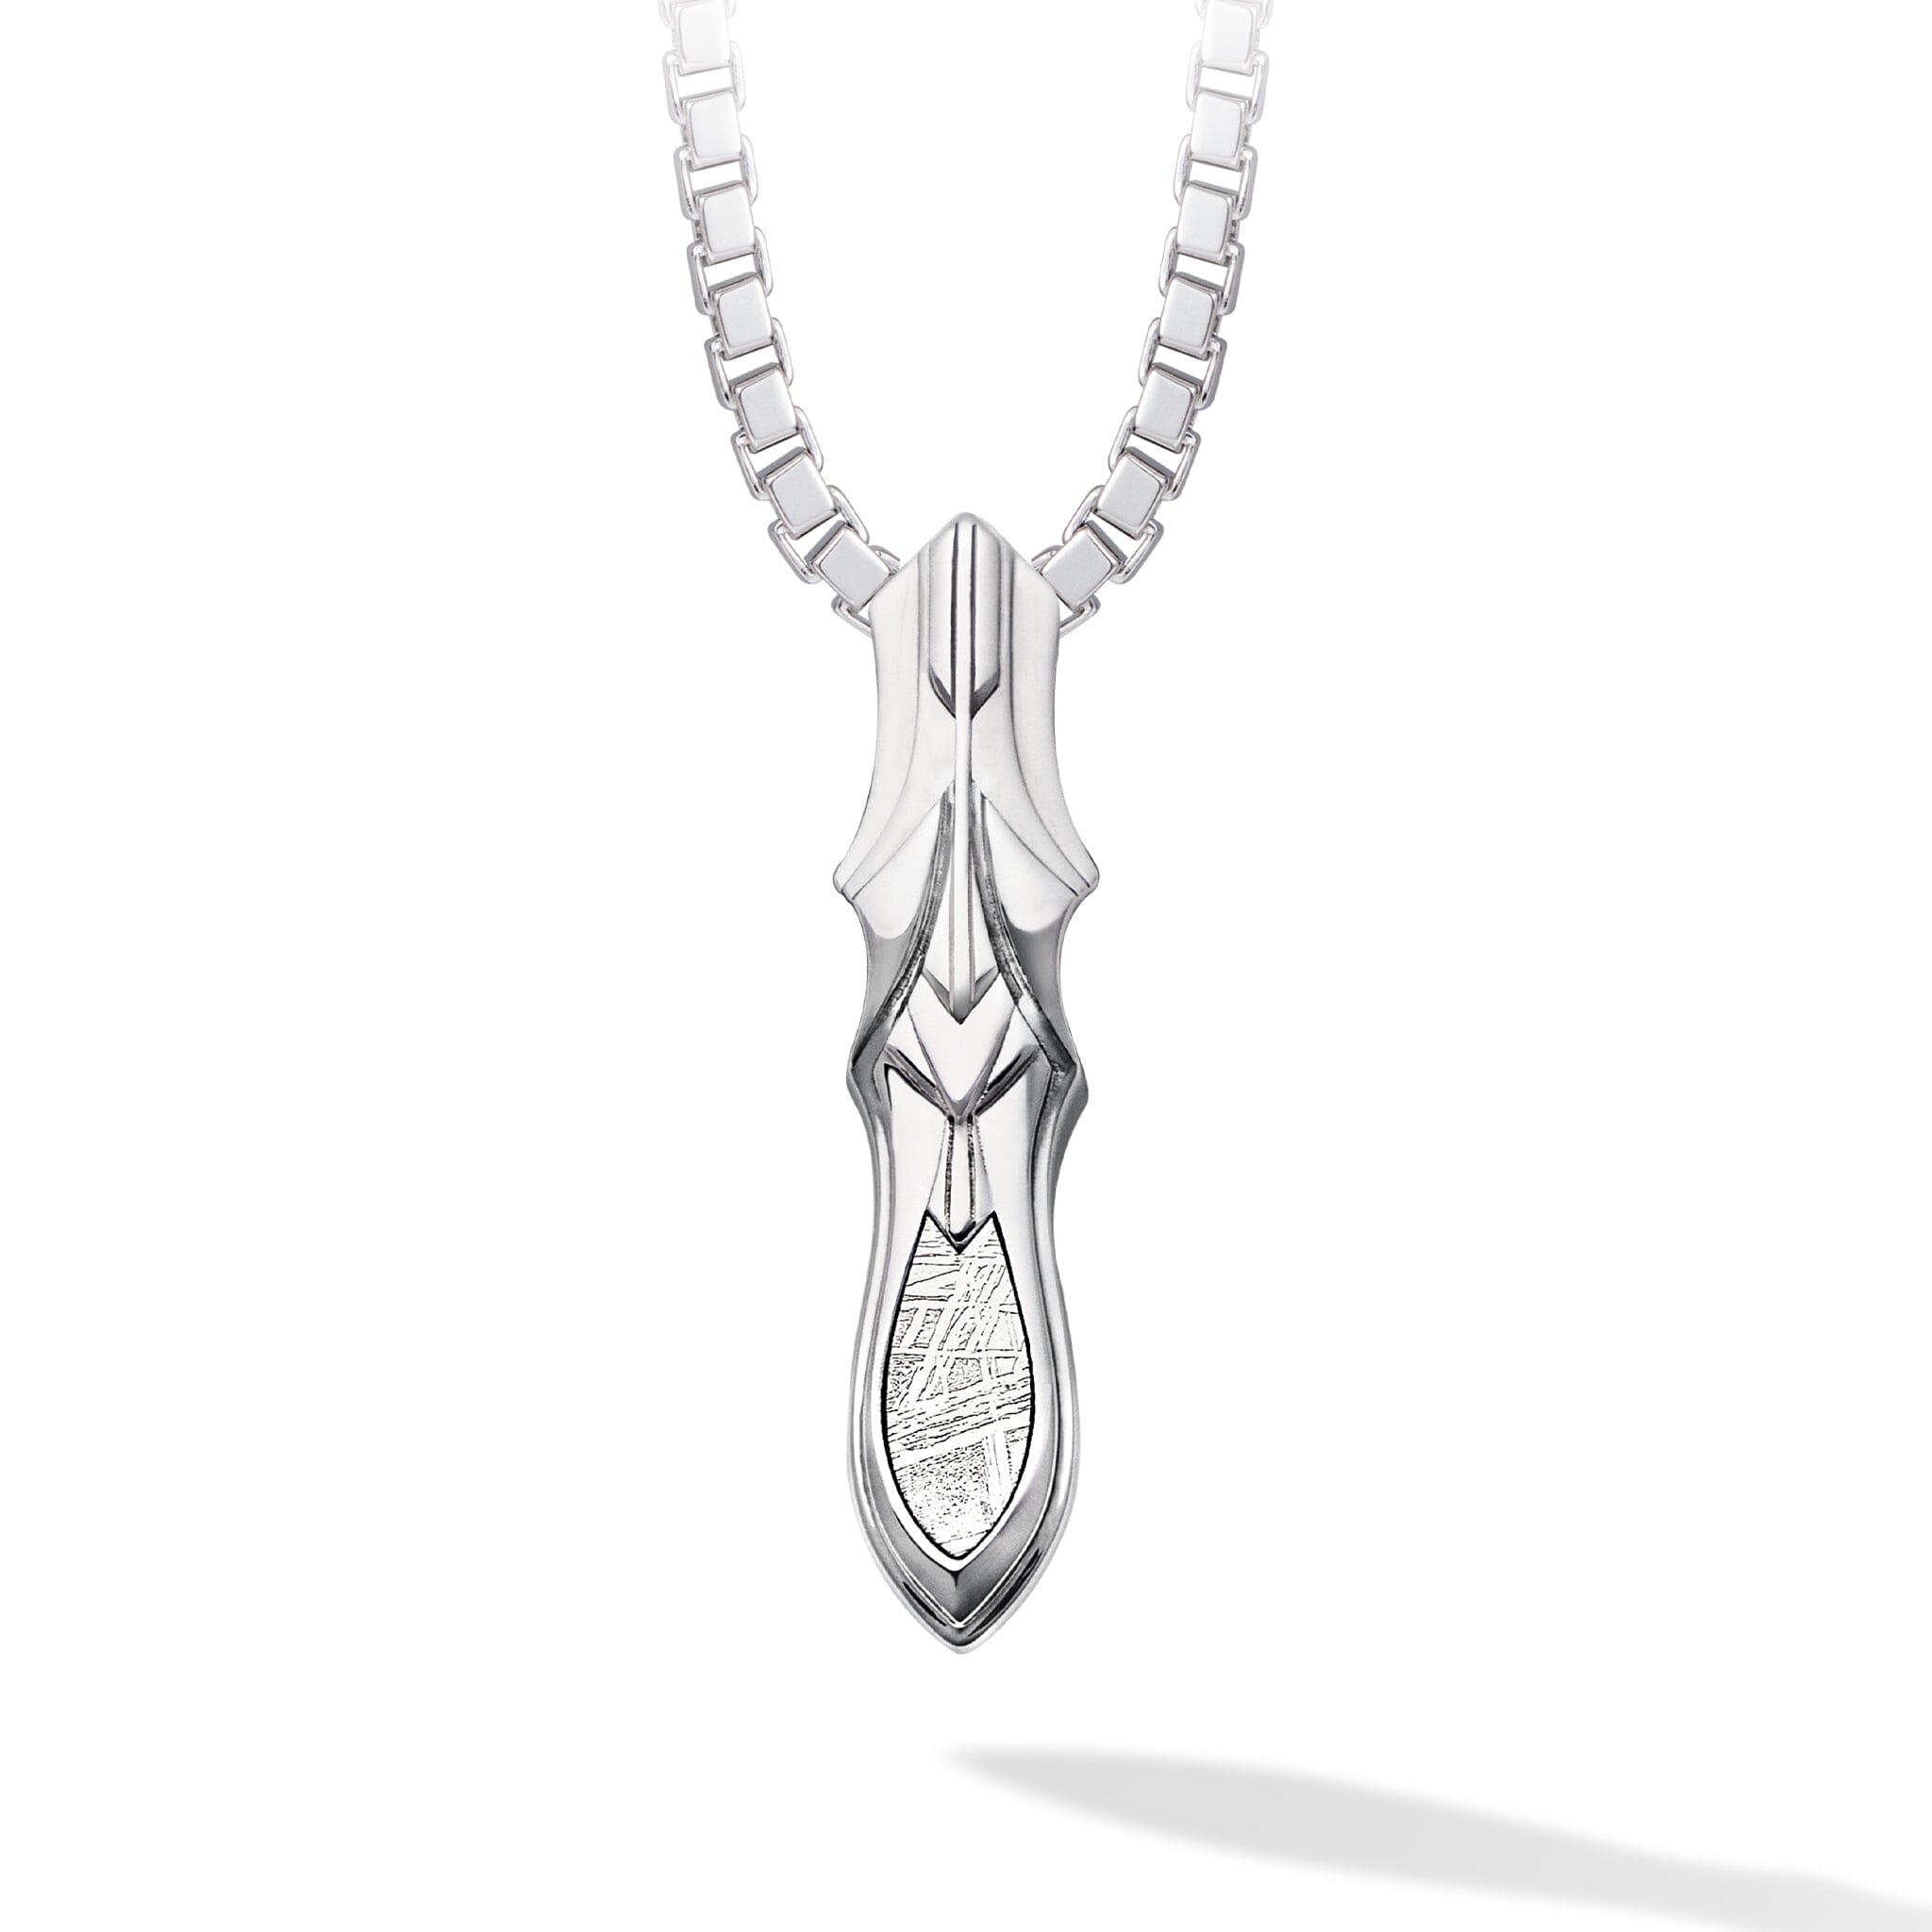 Men's Blade of Seven Seas Necklace with Meteorite Necklaces WAA FASHION GROUP 